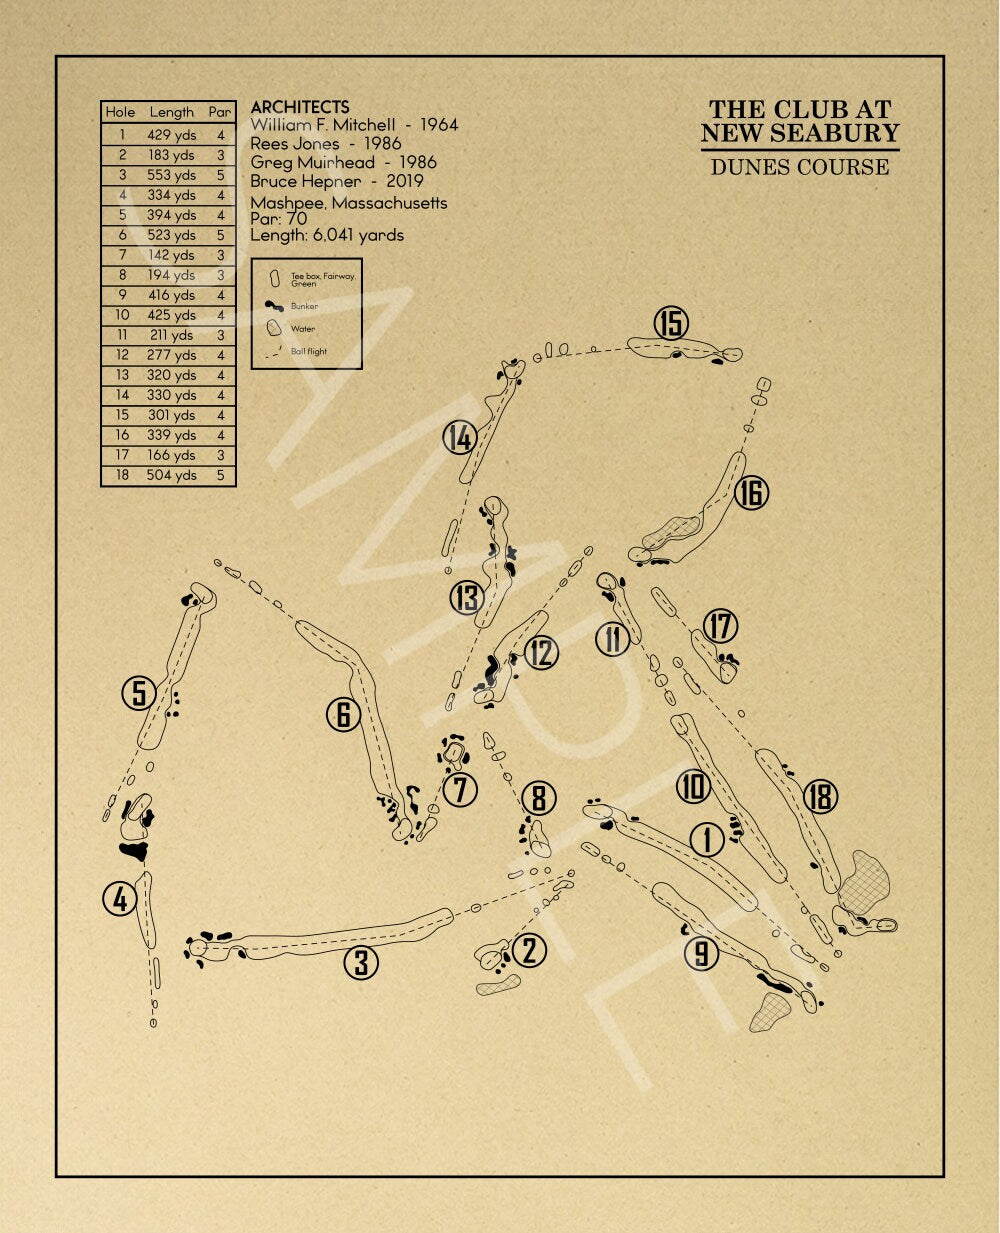 The Club at New Seabury Dunes Course Outline (Print)